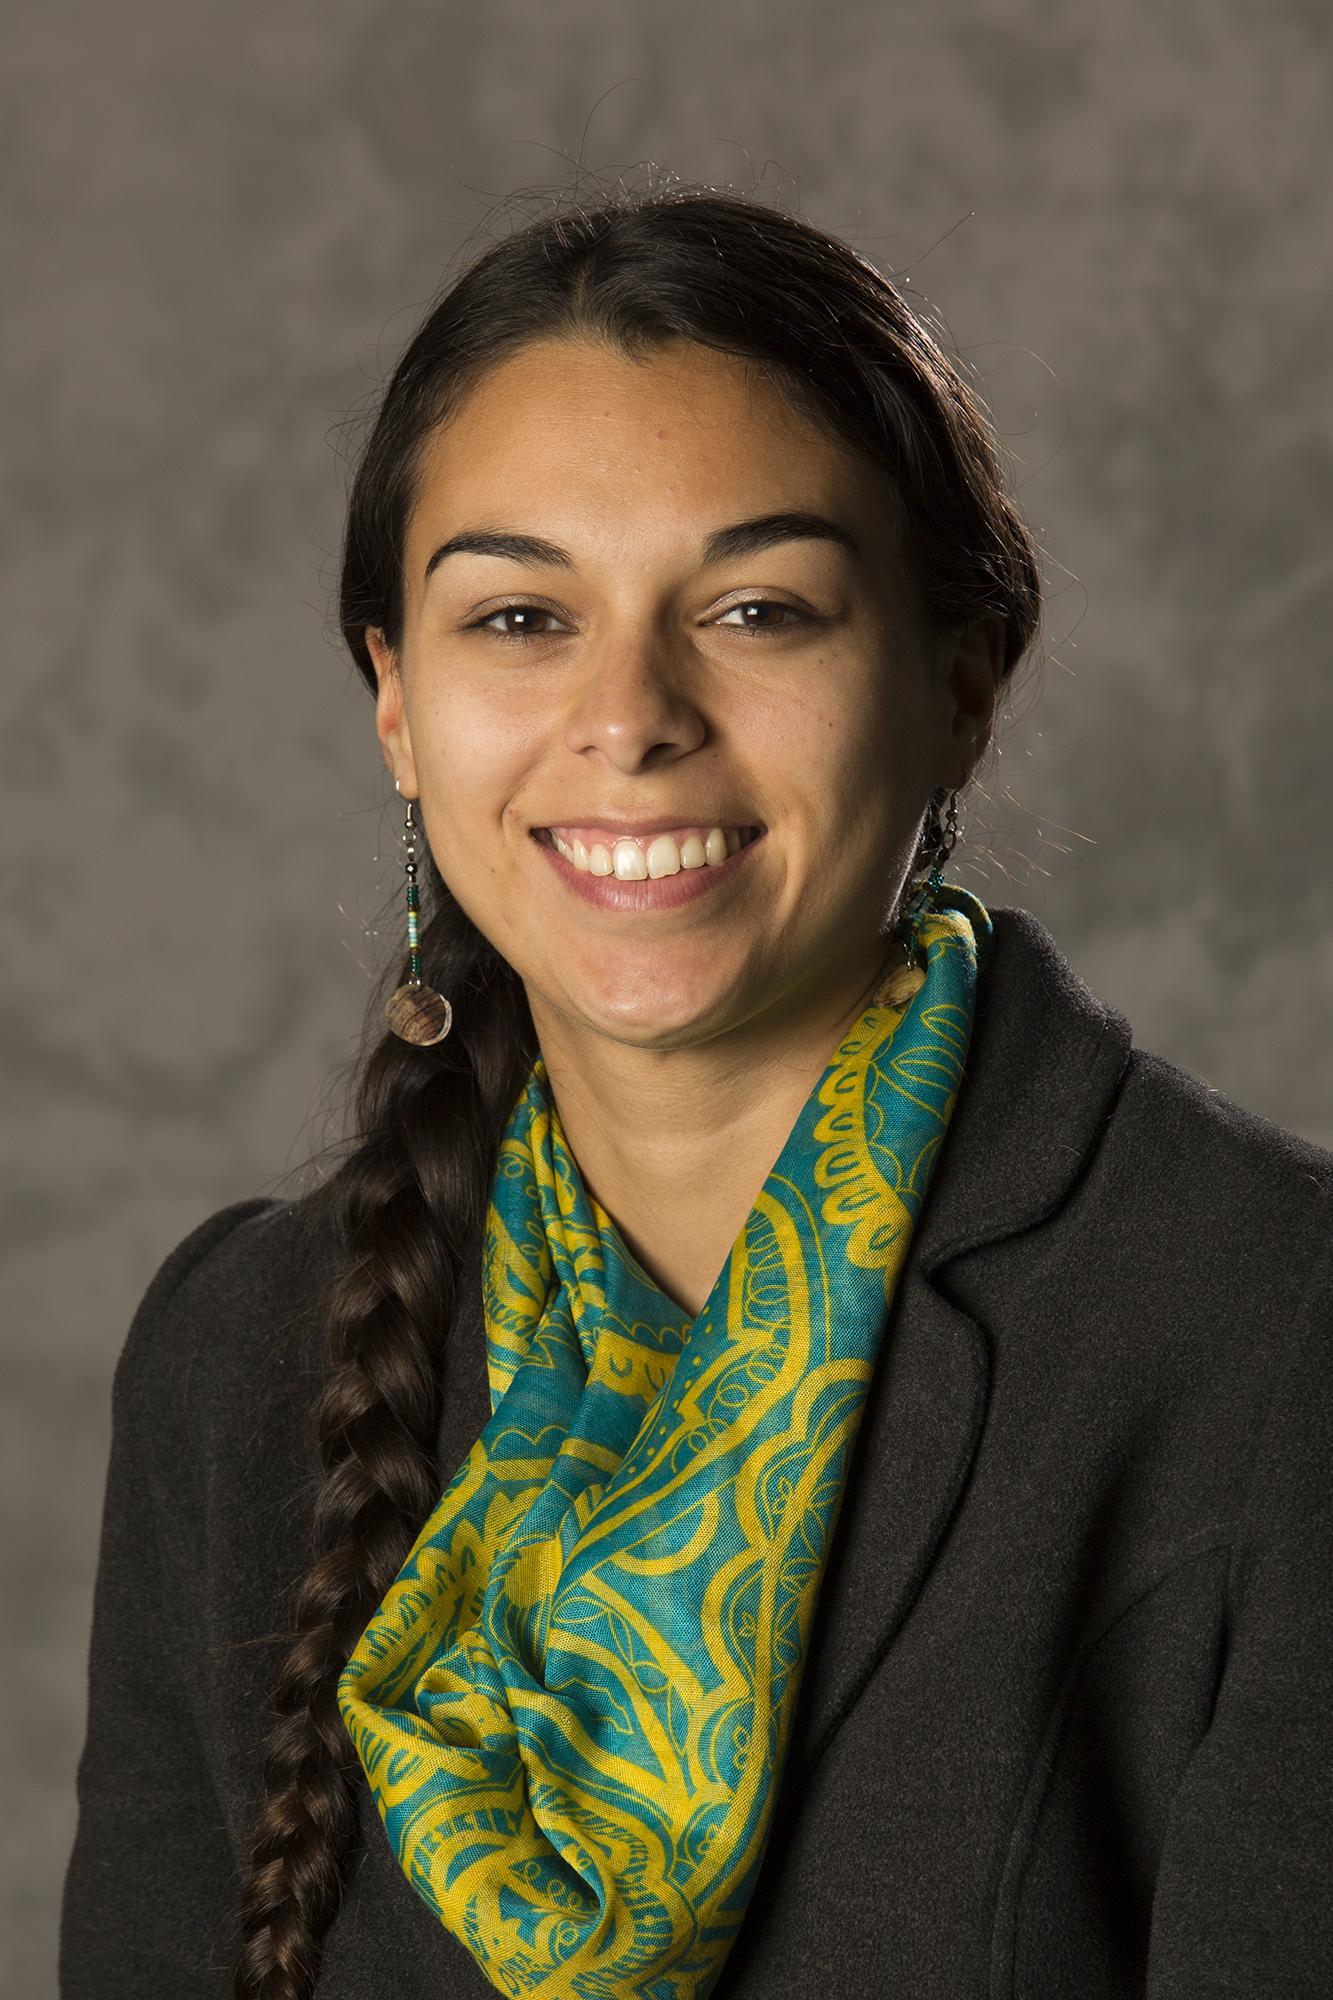 Schlichting, a 2016 master’s grad from the CoJMC professional journalism track, currently works as assistant director at Vision Maker Media, a Native American broadcasting company in Lincoln focused on empowering Natives to control their narratives by tel